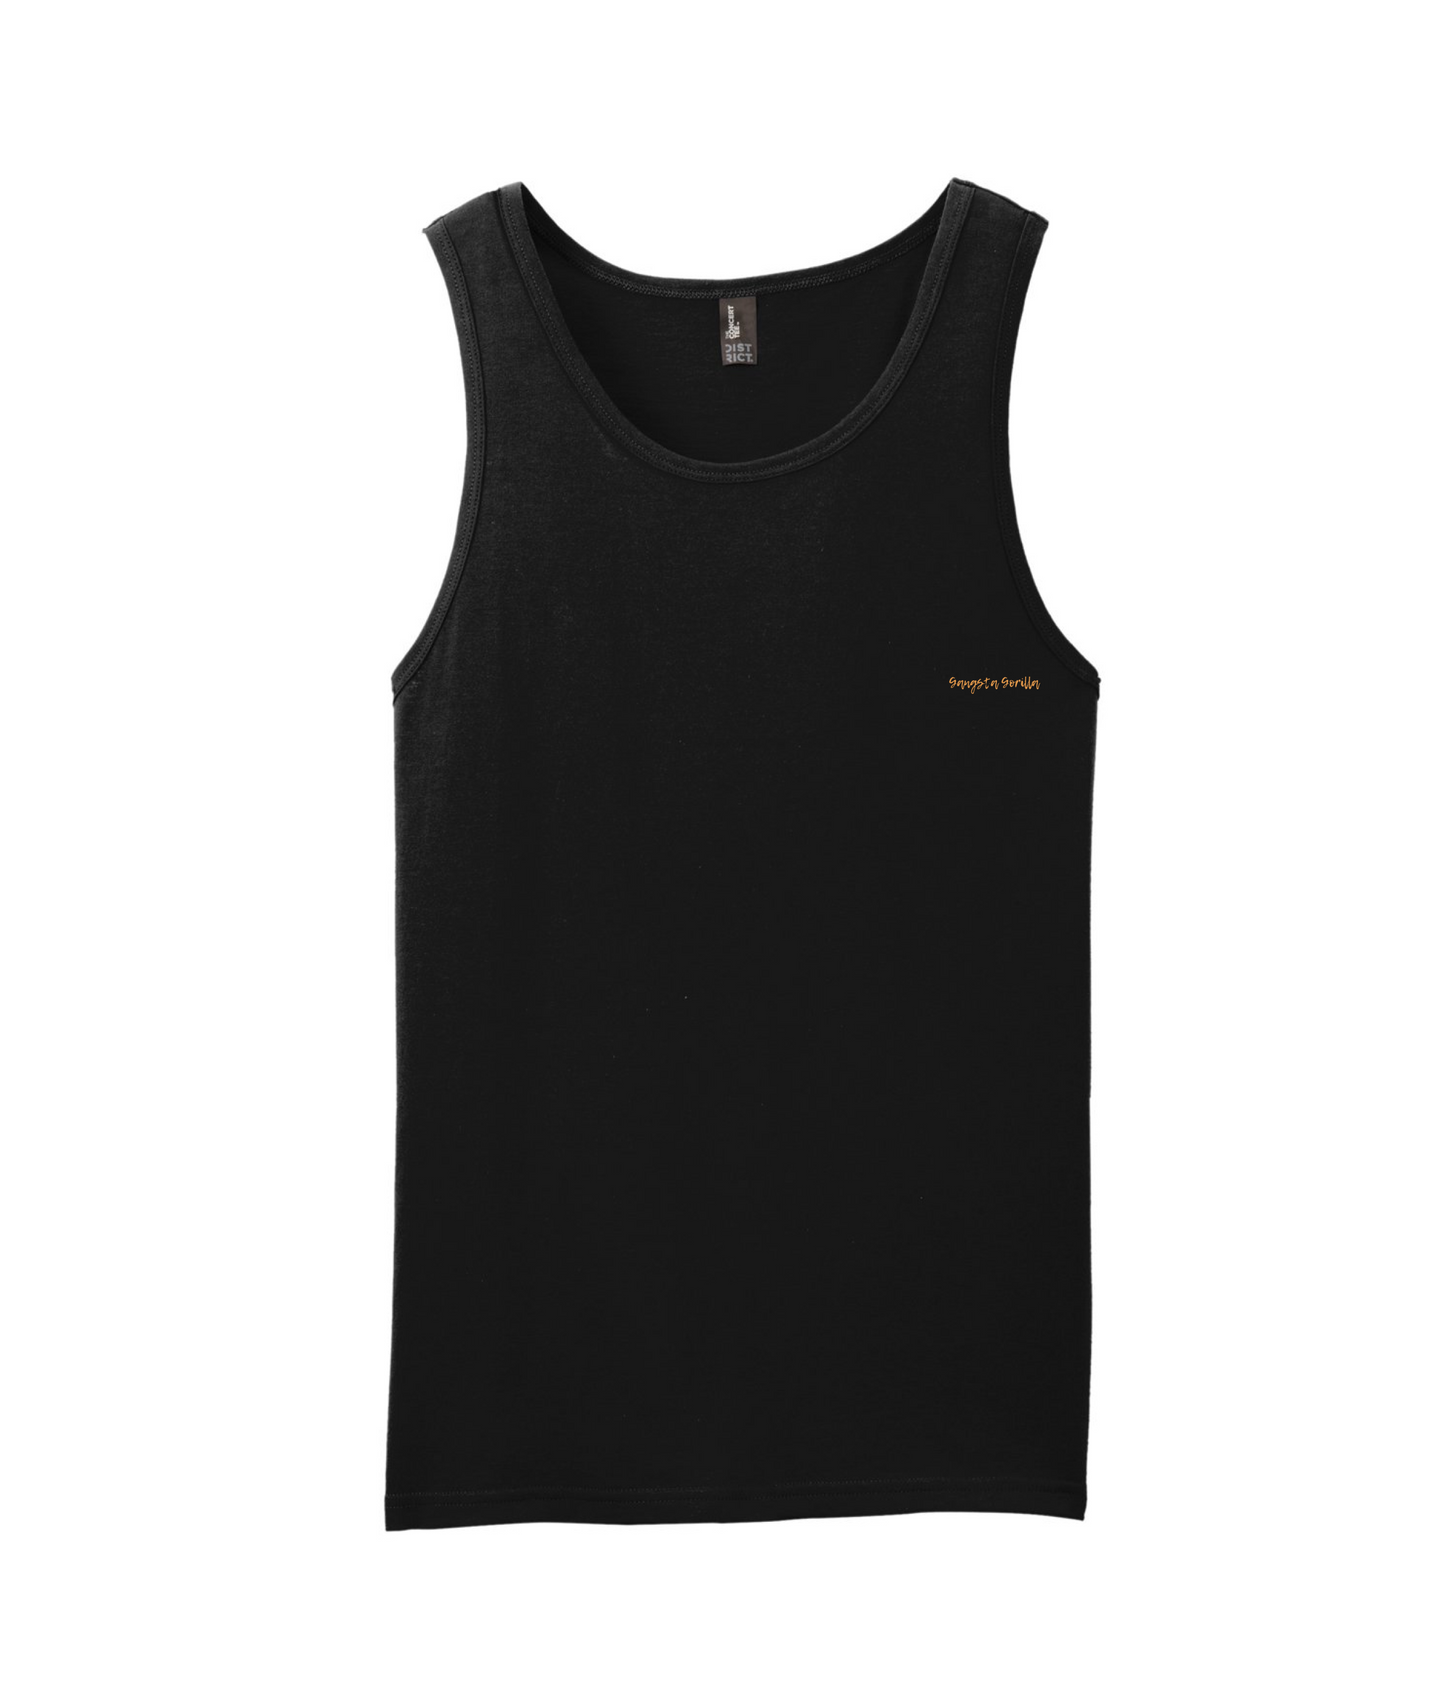 Gangsta Gorilla Extracts and Apparel - LOVE NOT HATE - Black Tank Top